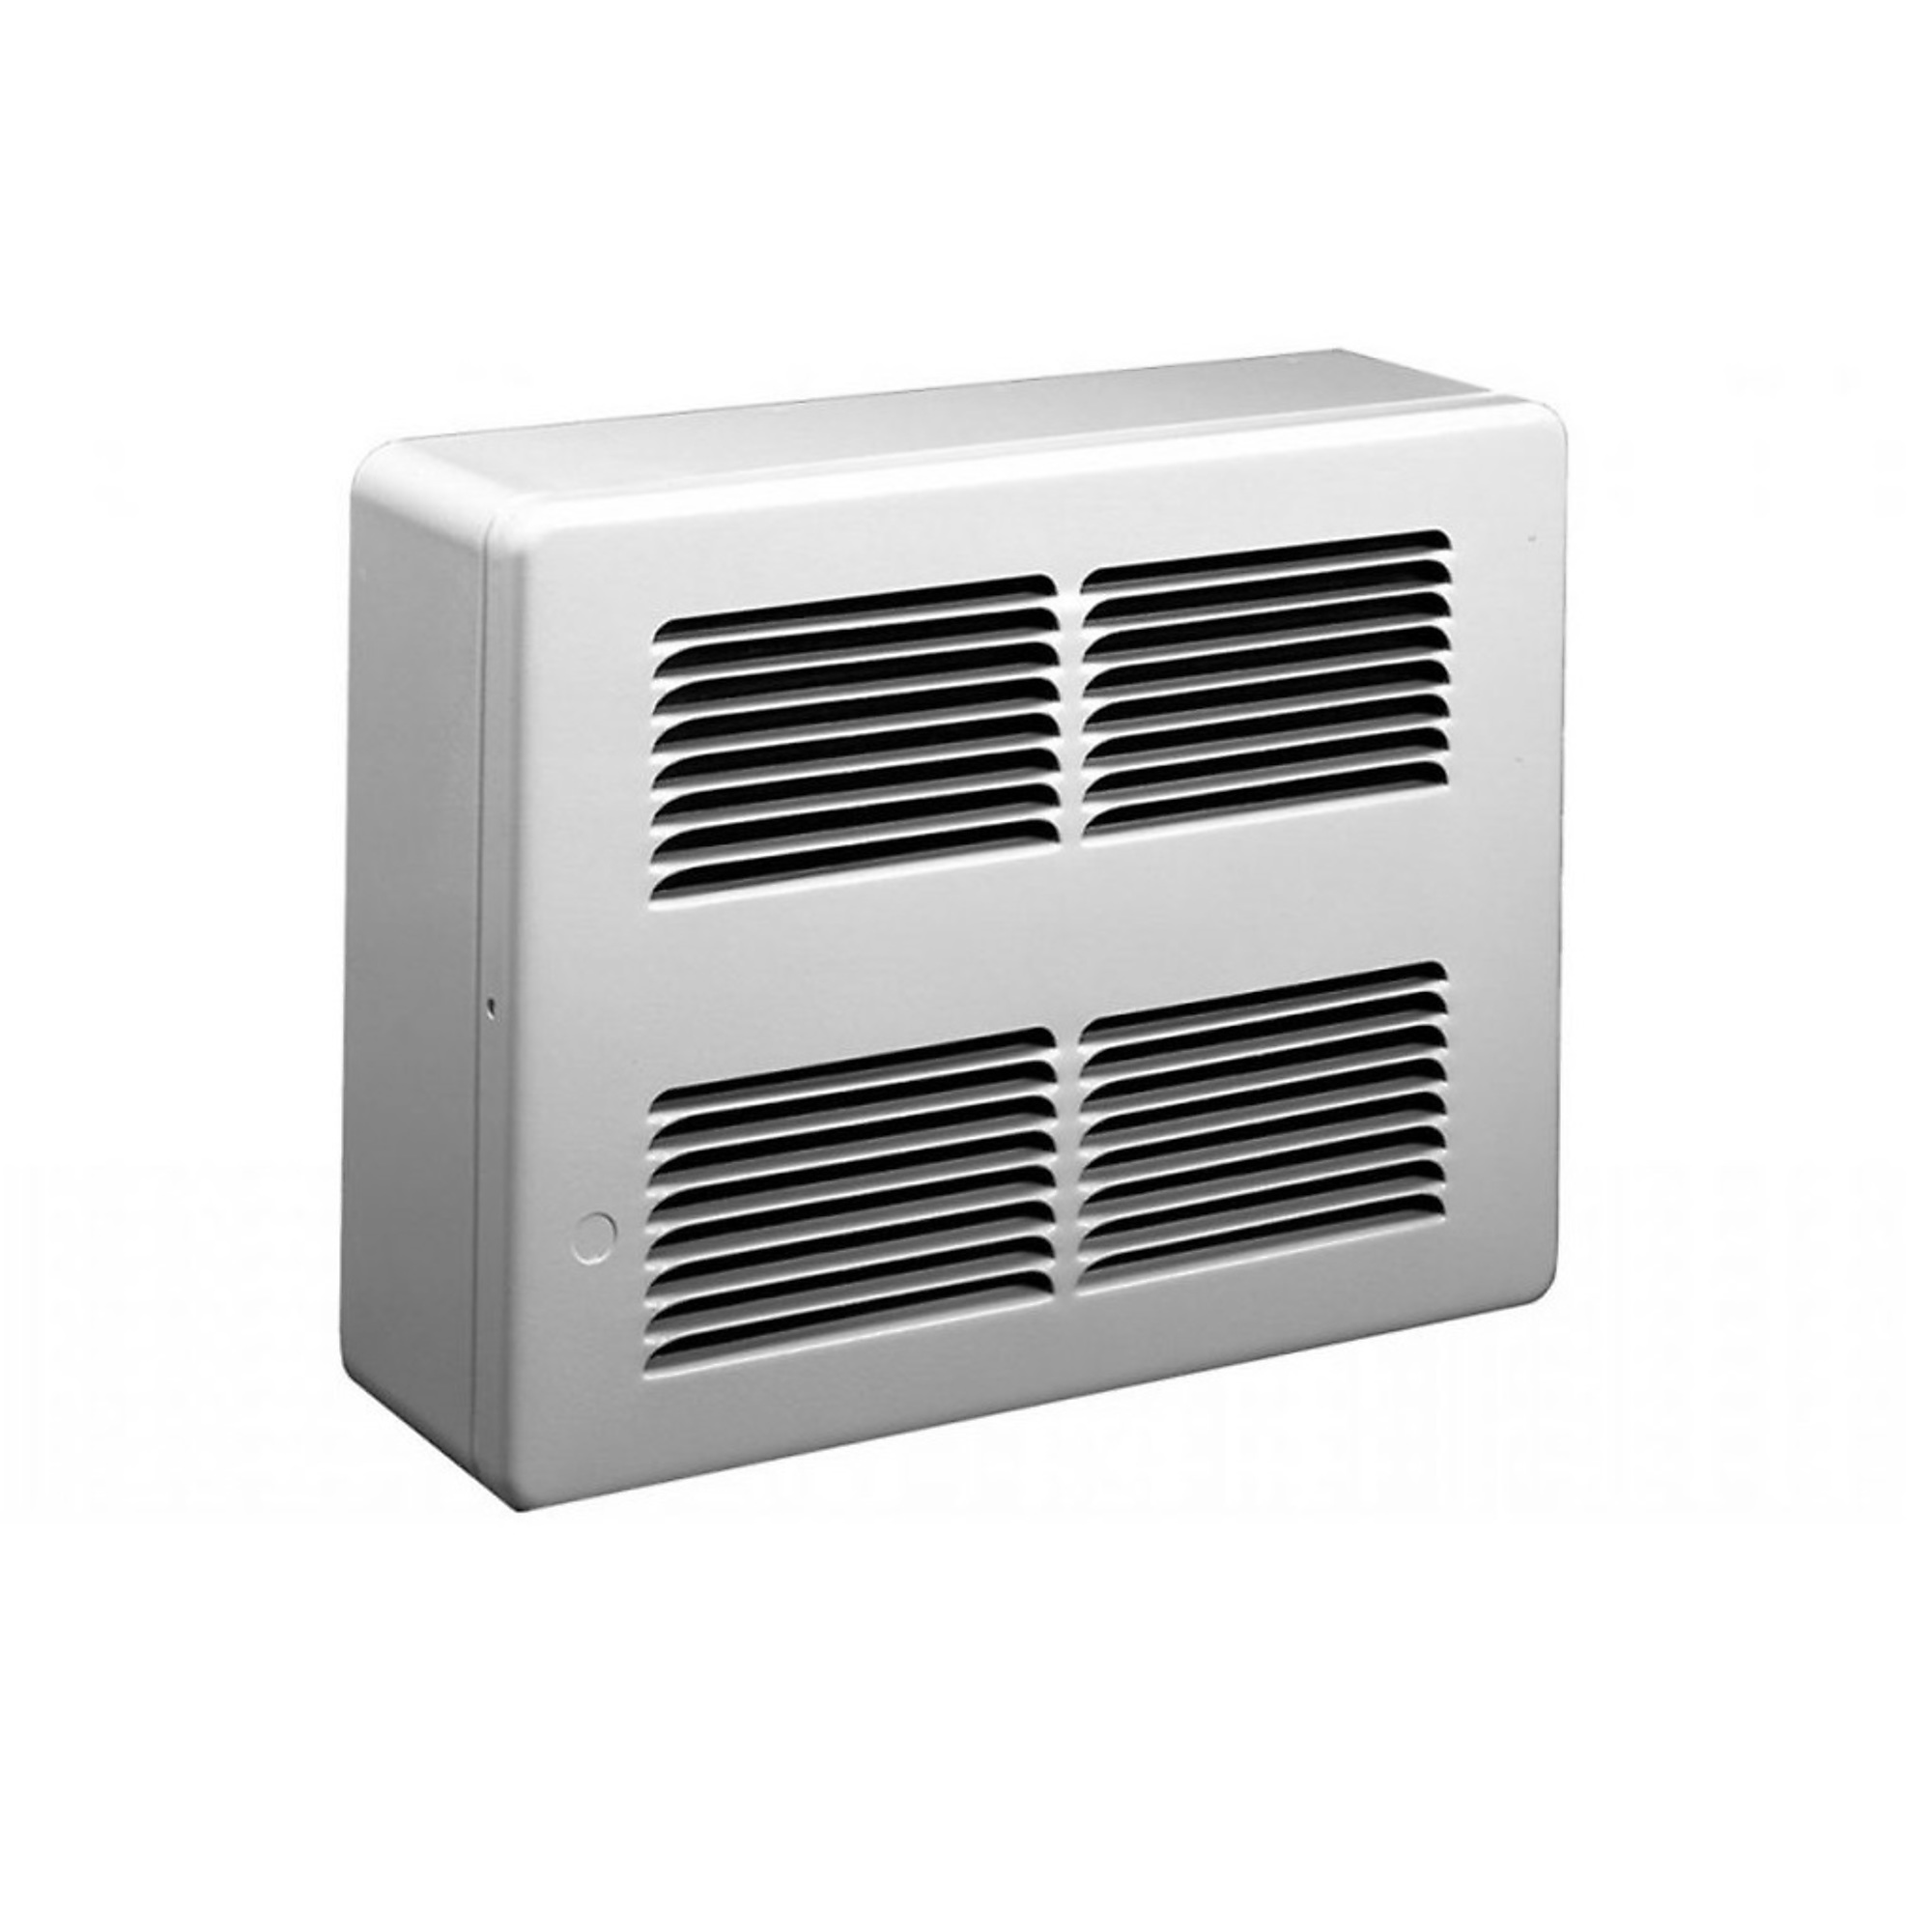 King Electrical, Surface Mounted Wall Heater, White, Heat Output 7677 Btu/hour, Heating Capability 225 ftÂ², Fuel Type Electric, Model SL2422-W